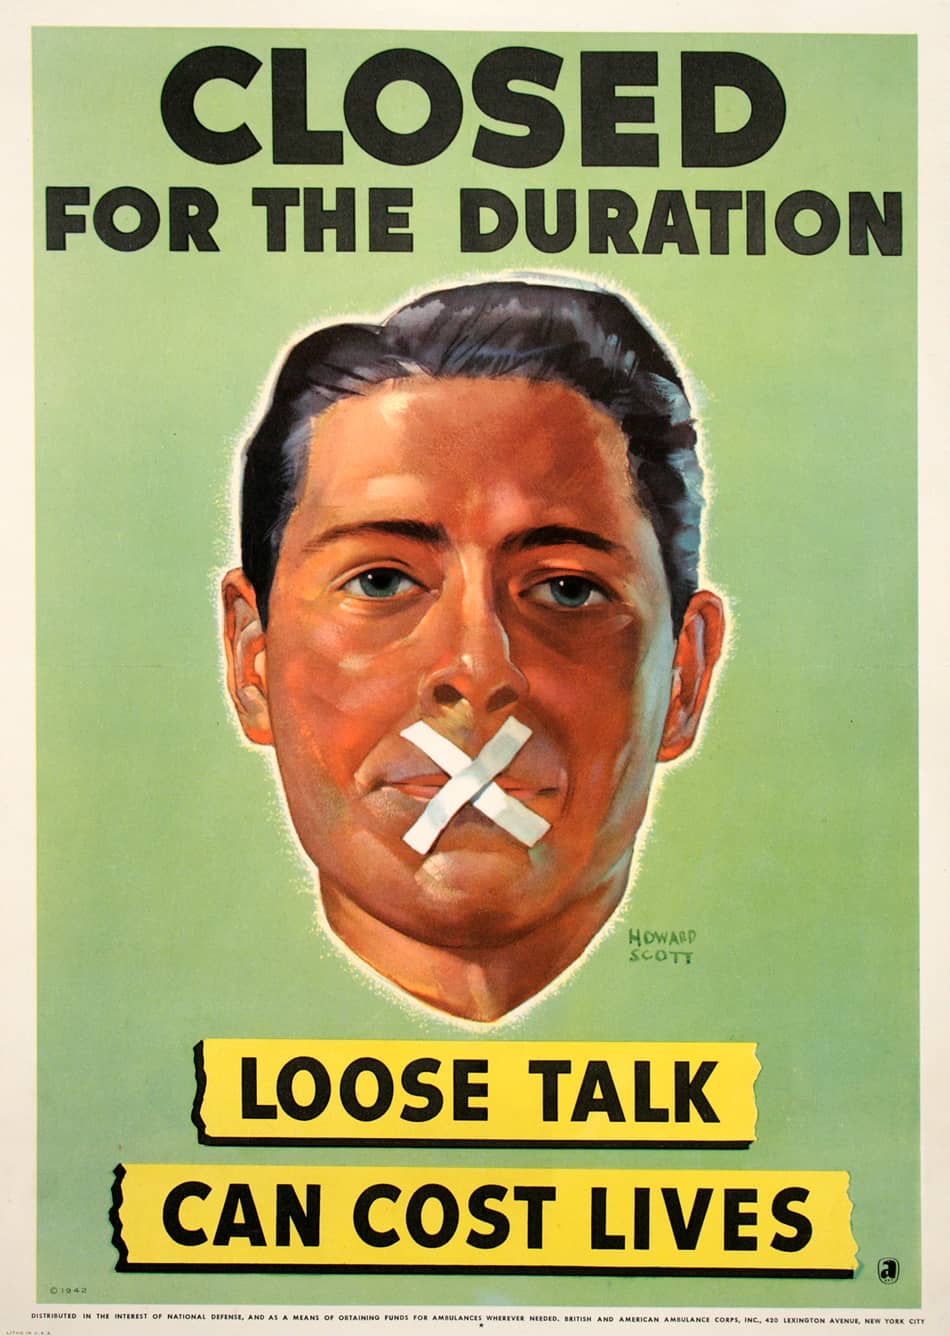 Original World War II Poster - Loose Talk Can Cost Lives Closed For the Duration by Scott 1942